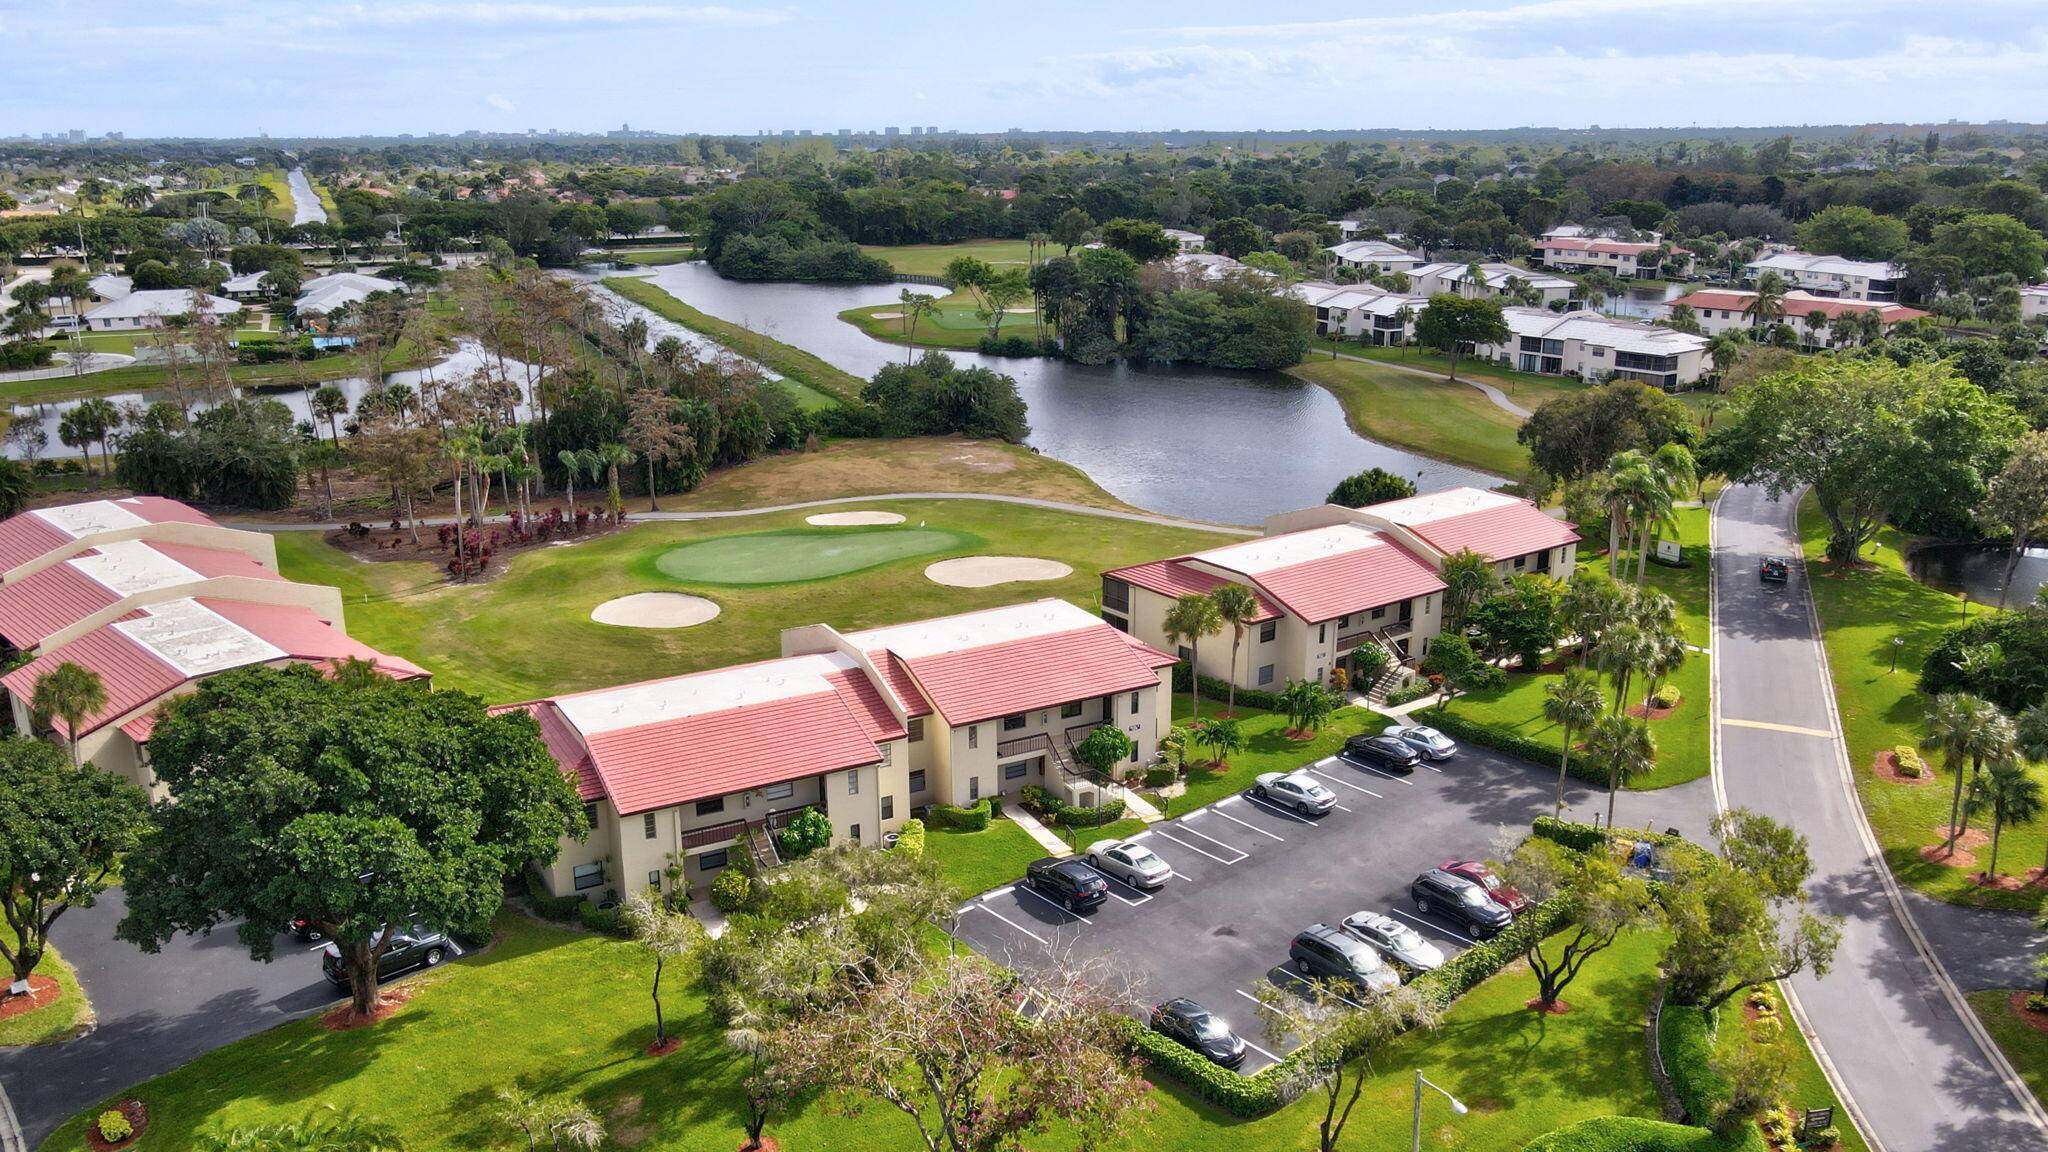 Welcome to your fresh faced condo overlooking the lush green fairways of the golf course !